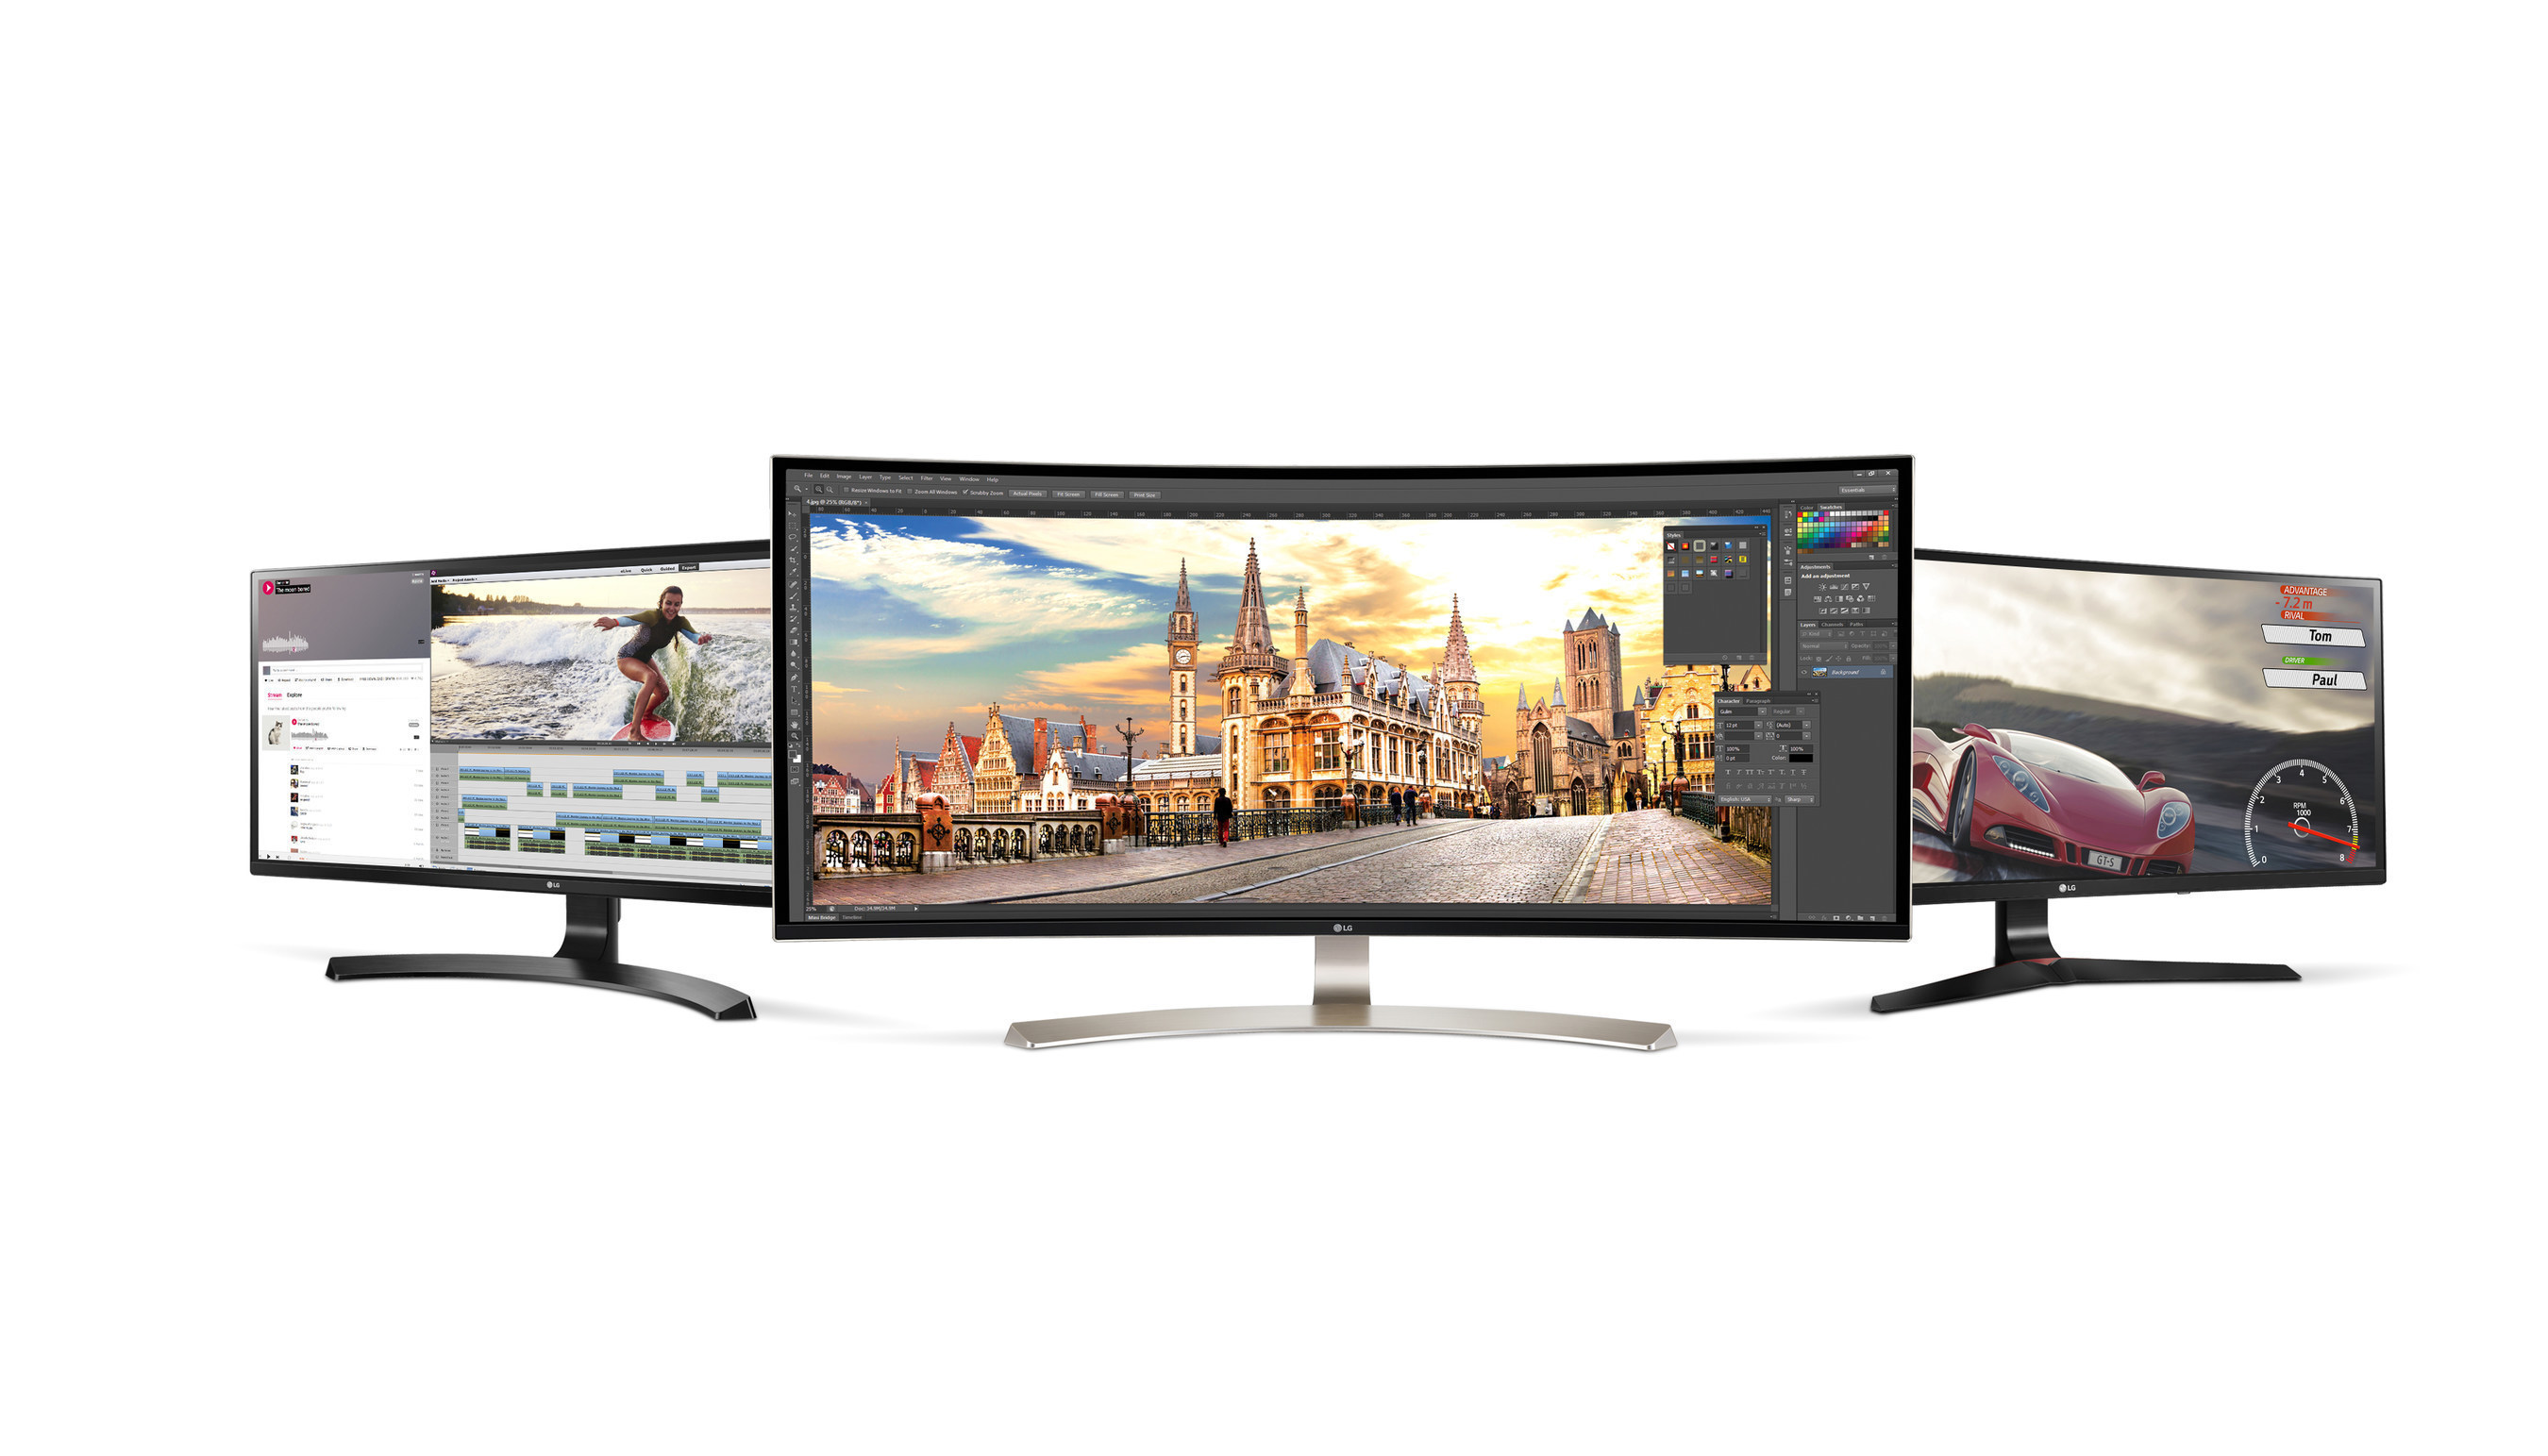 LG Electronics today announced three new 21:9 UltraWide monitors.